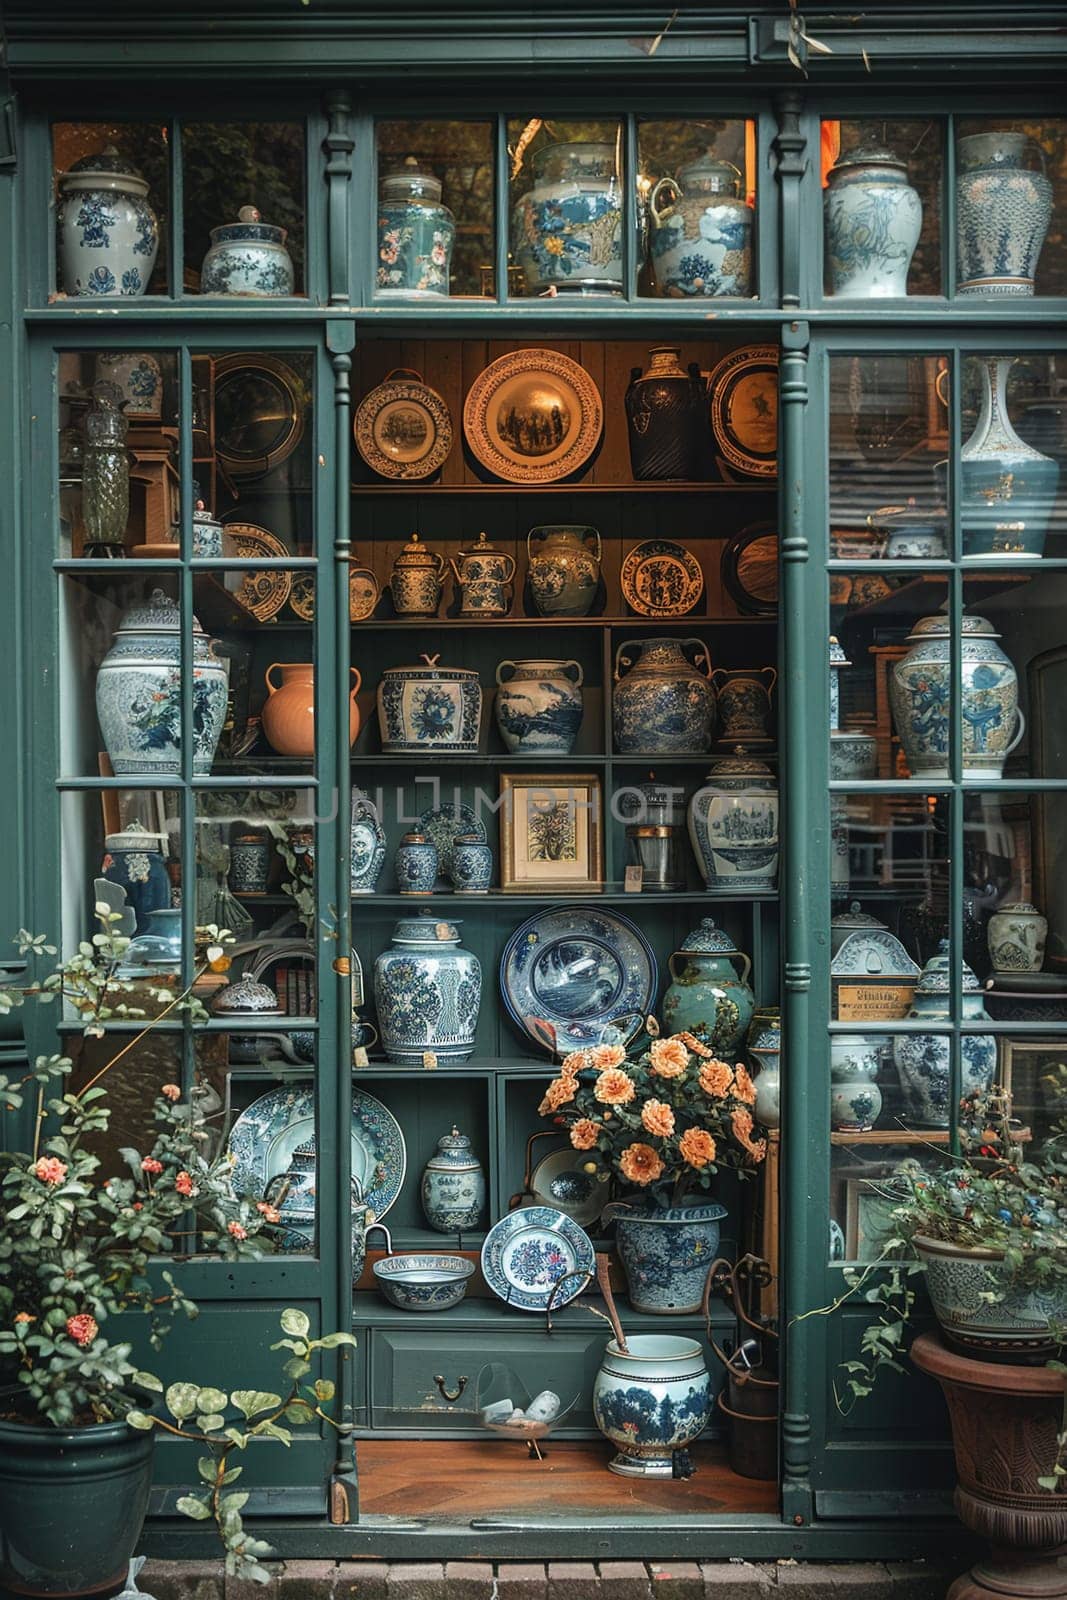 Charming Antique Shop Offering Hidden Gems to Collectors, The dusty blur of antiques and curios paints a scene of treasure-hunting business.